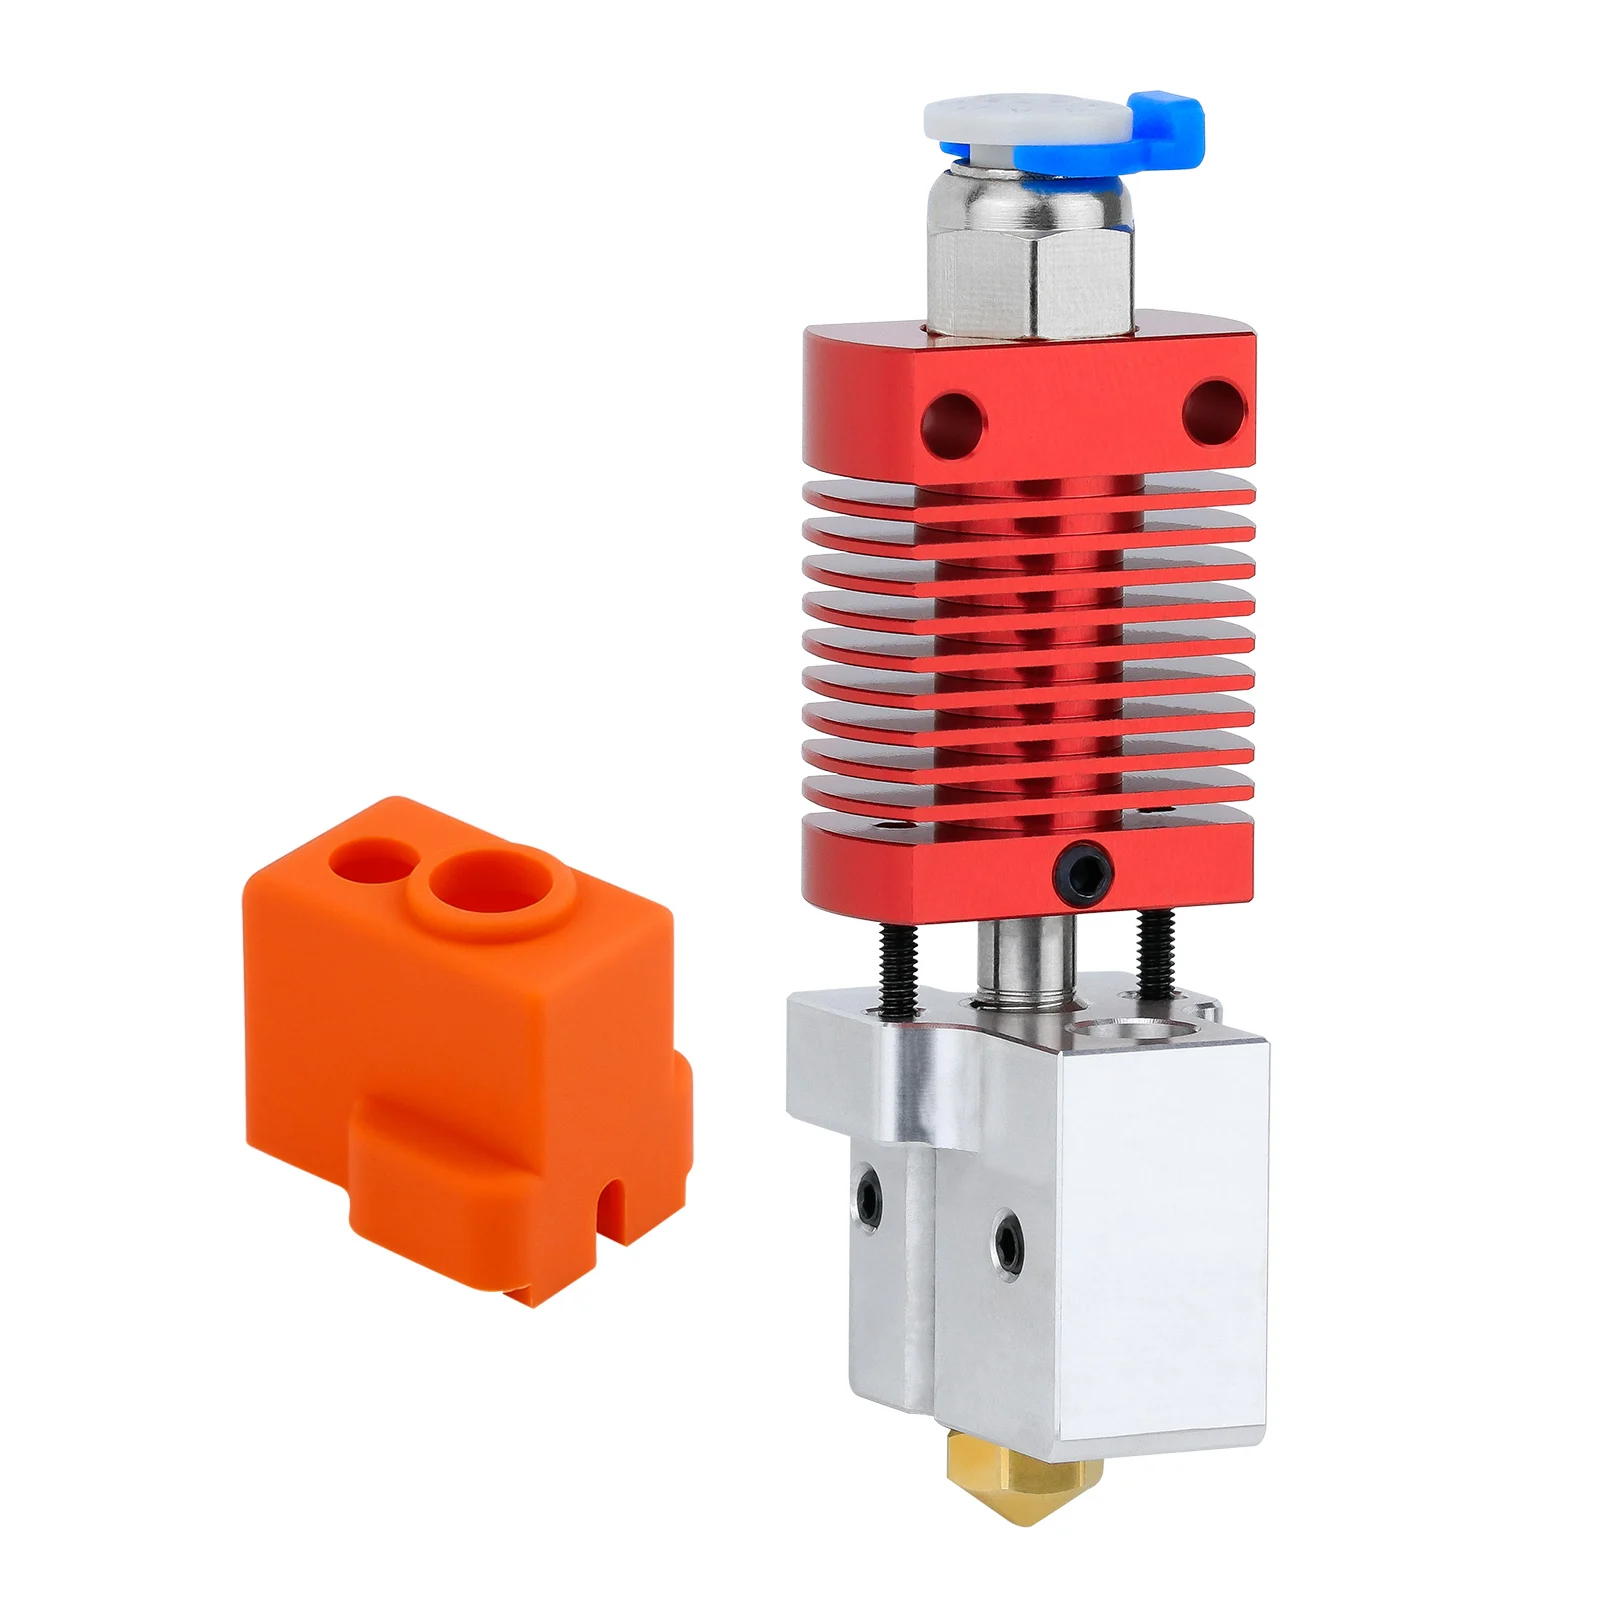 Newest Ender3 High Temperature Hotend Kit Reach To 550℃ Copper Plated Volcano Nozzle Heating Block Bi-Metal Throat CR10 Extruder ender 3 high temperature hotend kit copper plated volcano nozzle heating block bimetal throat ender3 pro v2 cr10 10s extruder